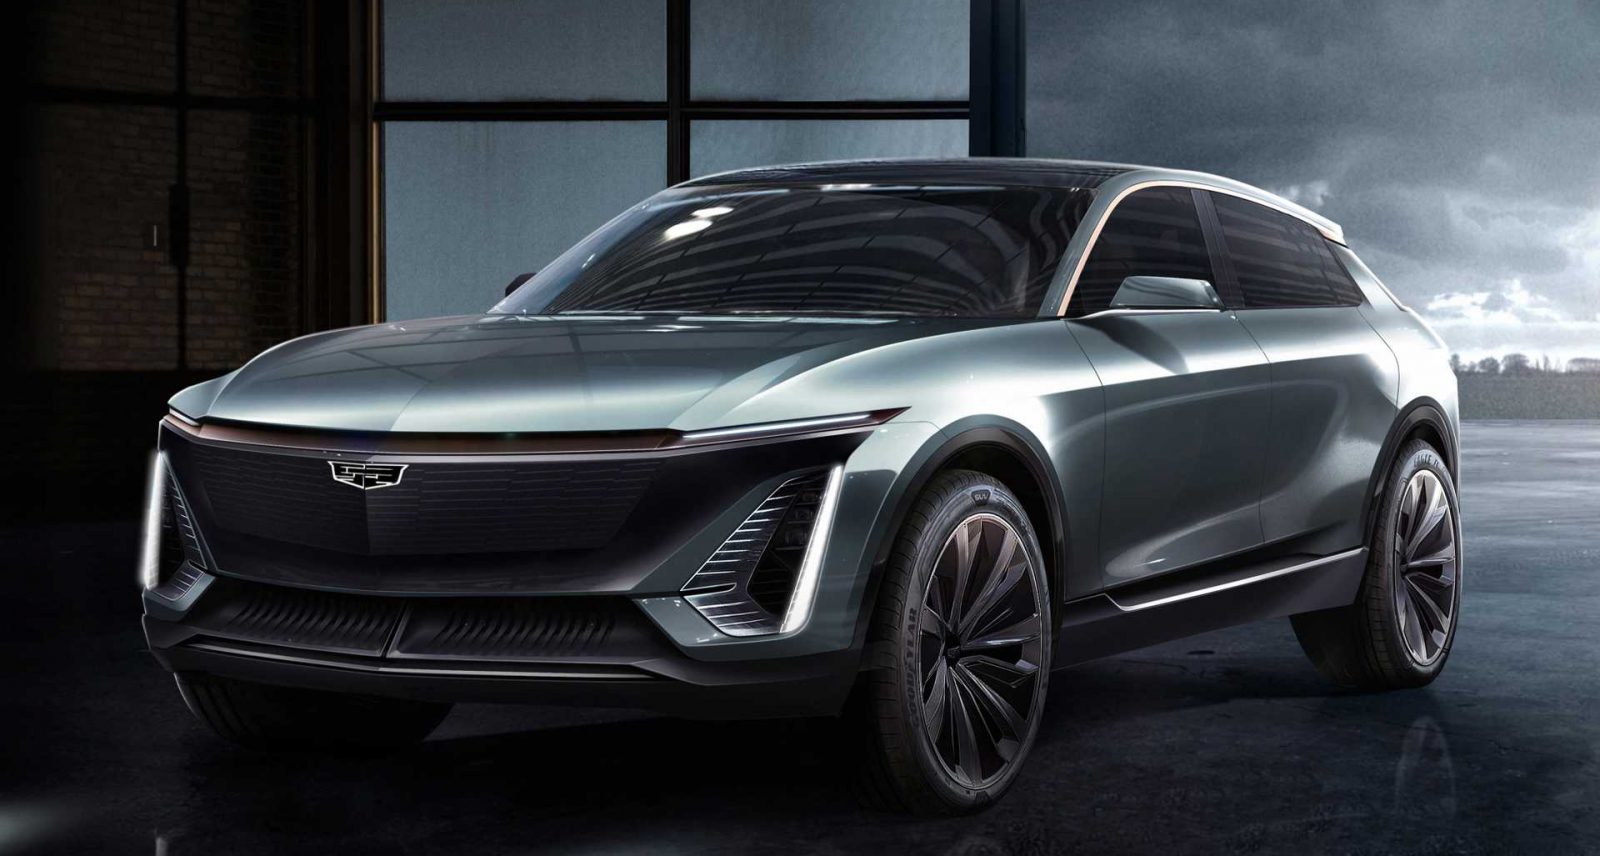 Cadillac's First-Ever Electric Vehicle Will Be This Super Futuristic Crossover